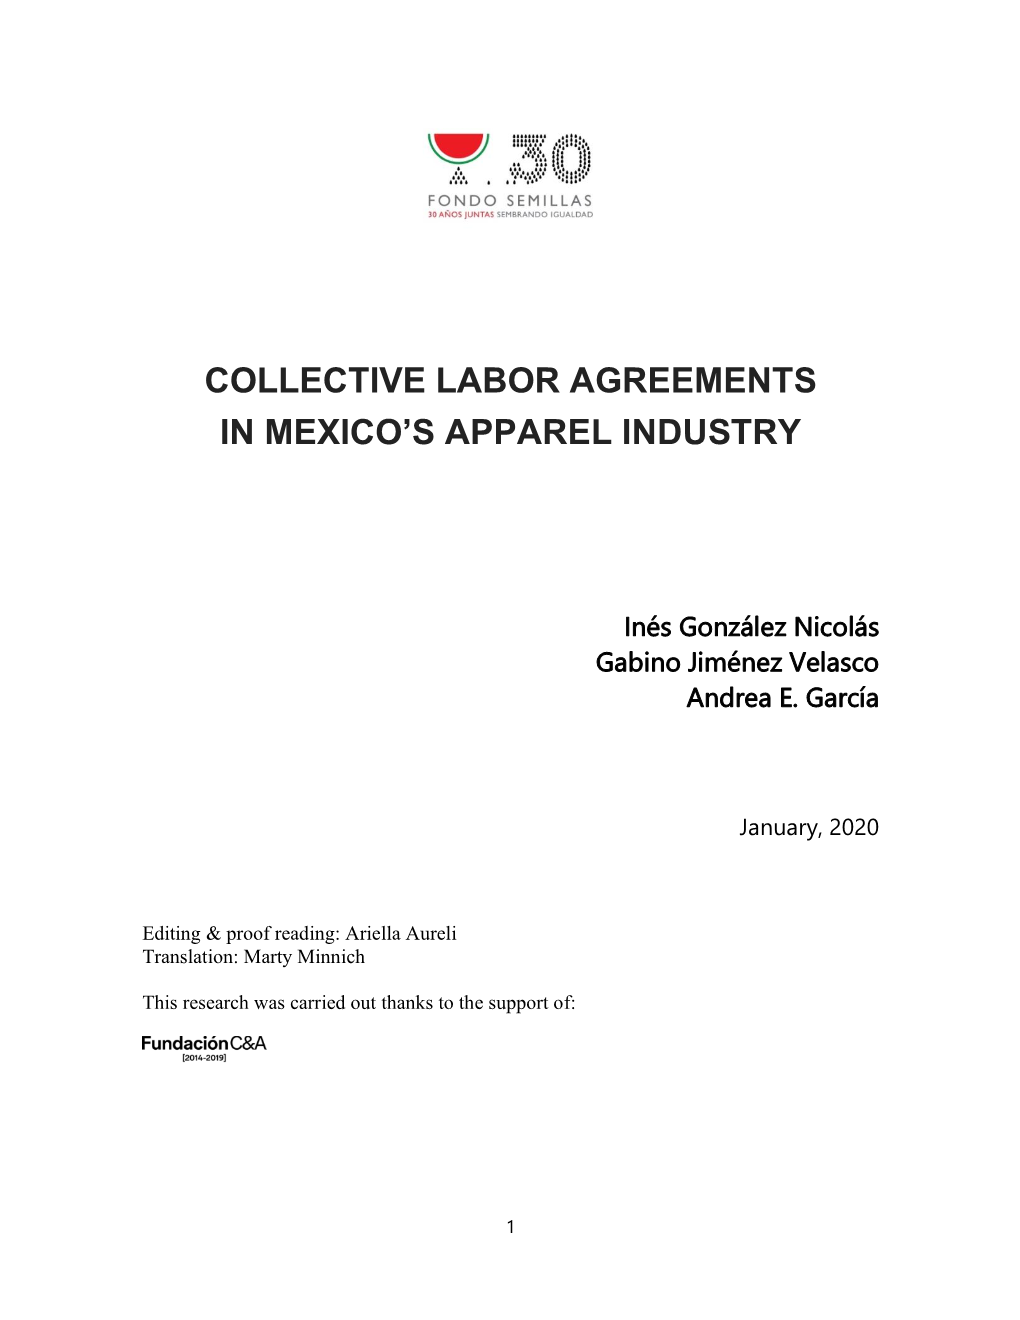 Collective Labor Agreements in Mexico's Apparel Industry